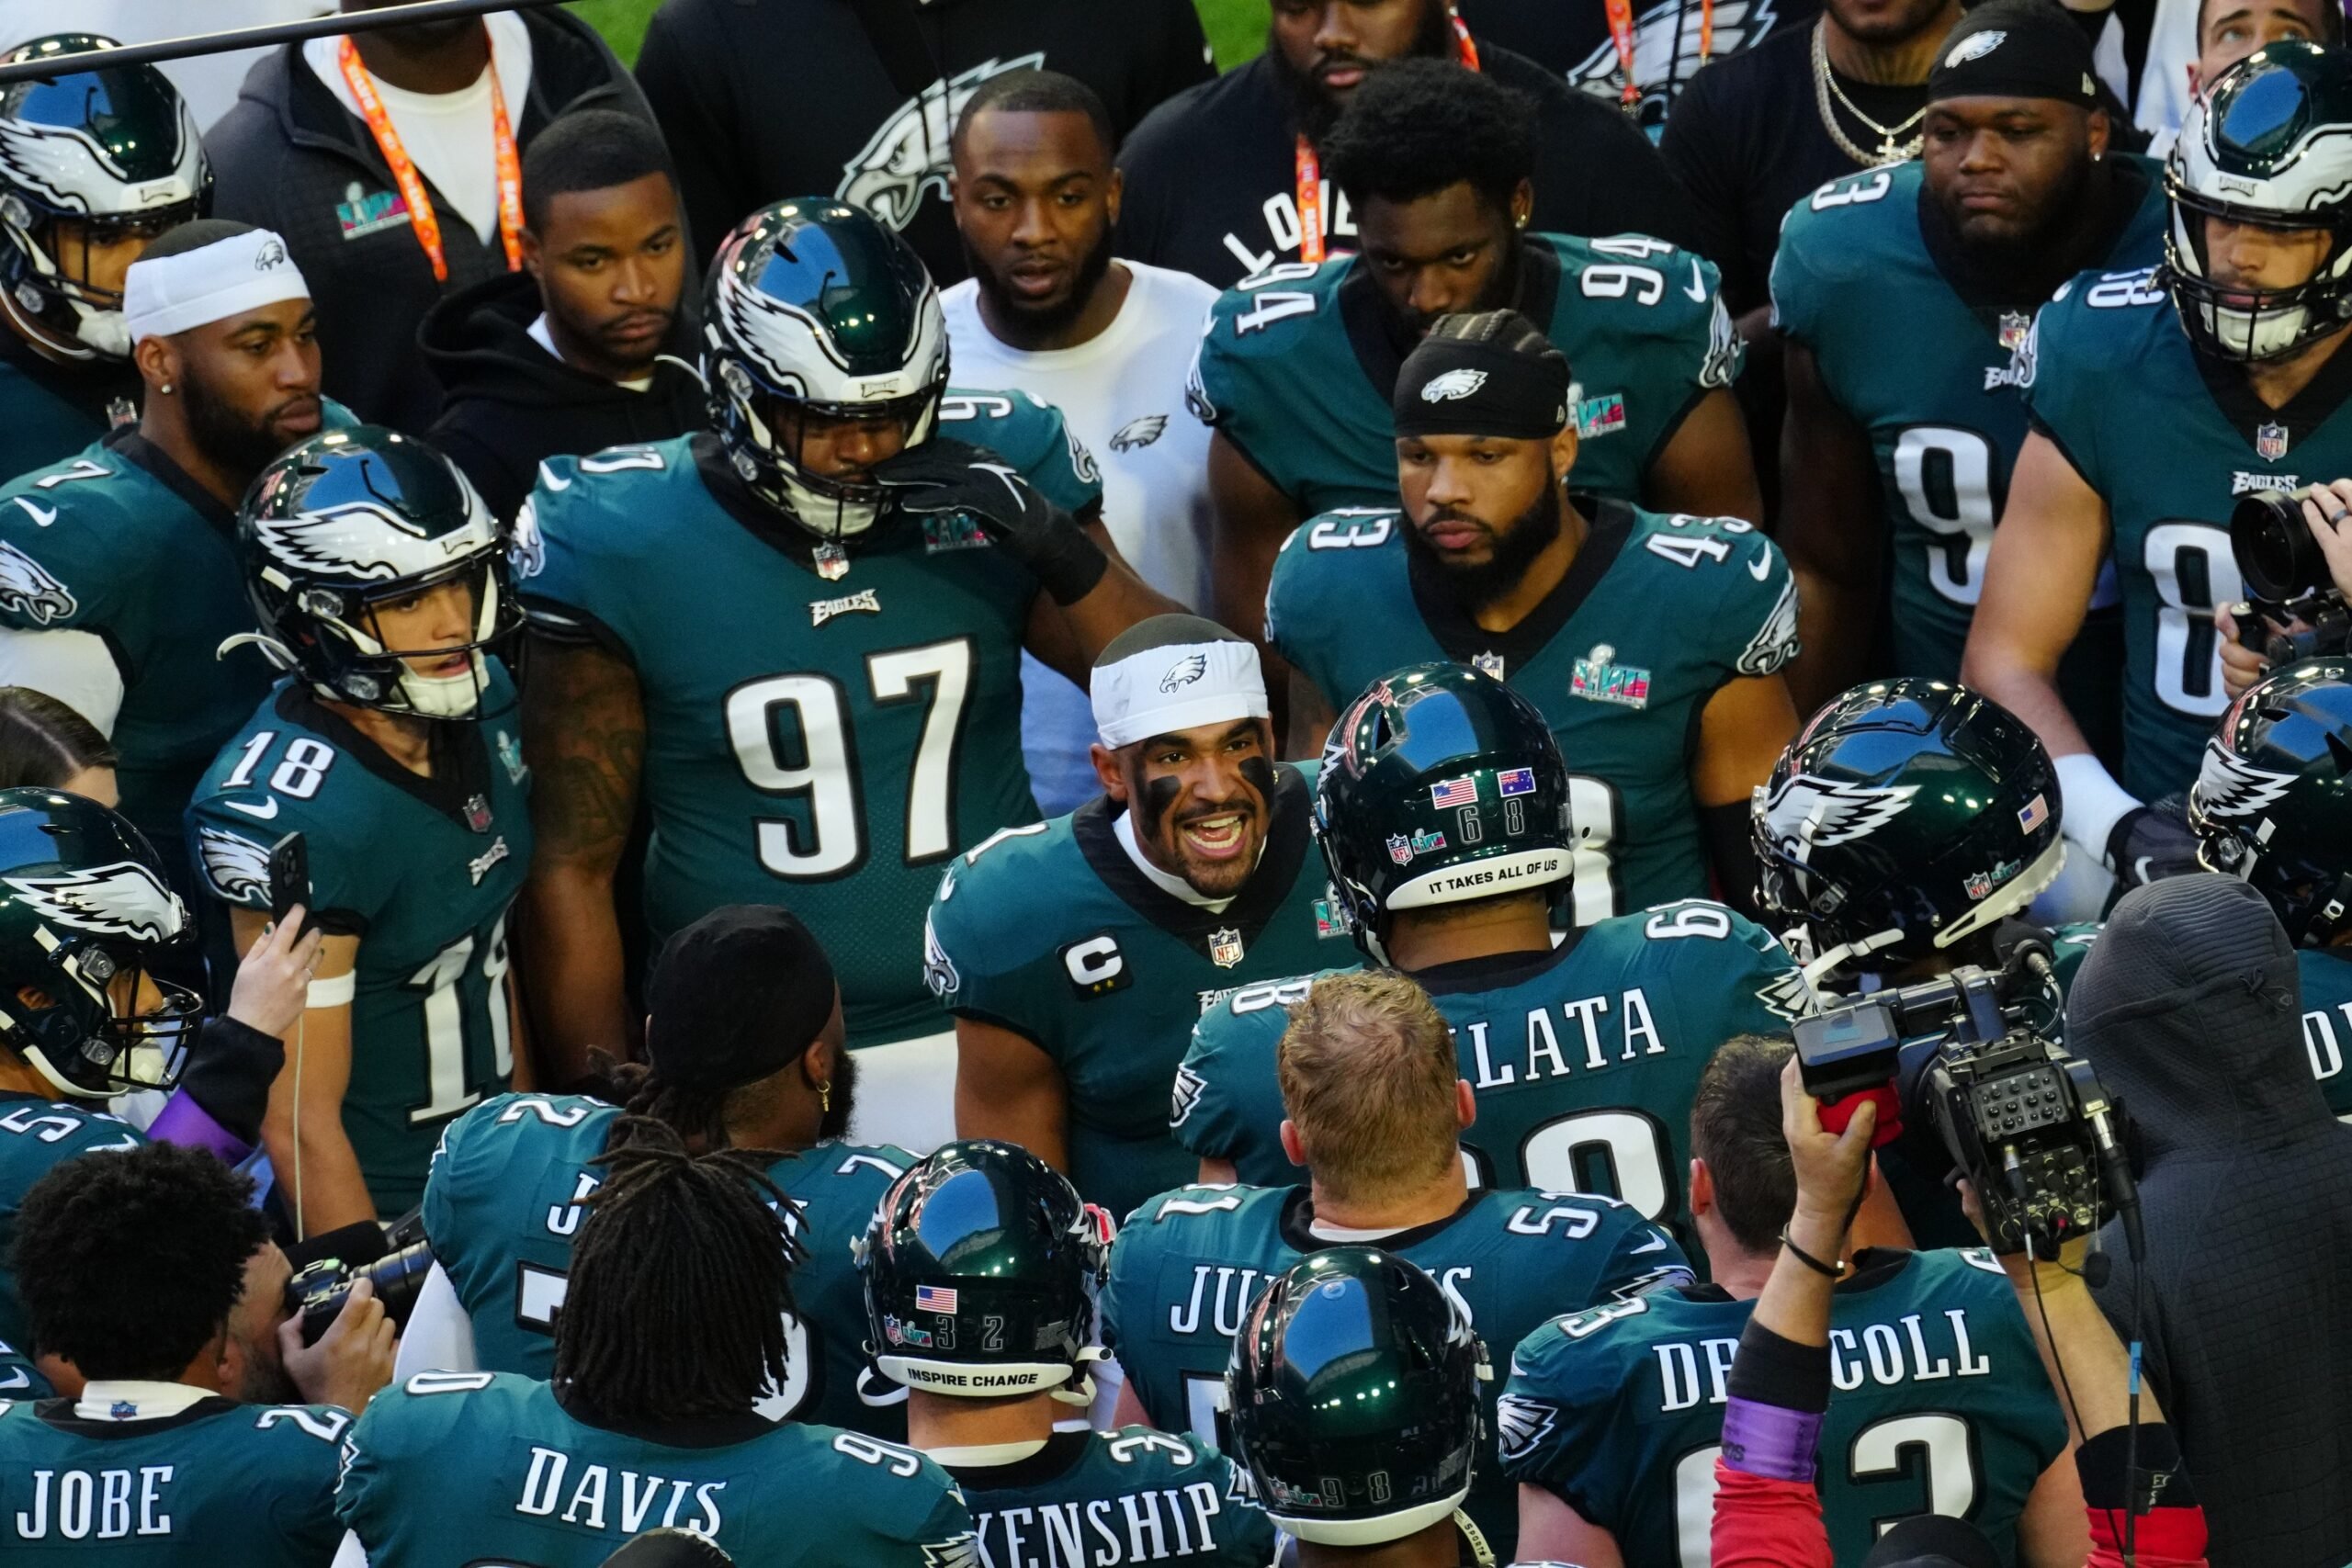 2023 Philadelphia Eagles schedule: Complete schedule, ticket, and matchup  information for the 2023 NFL season